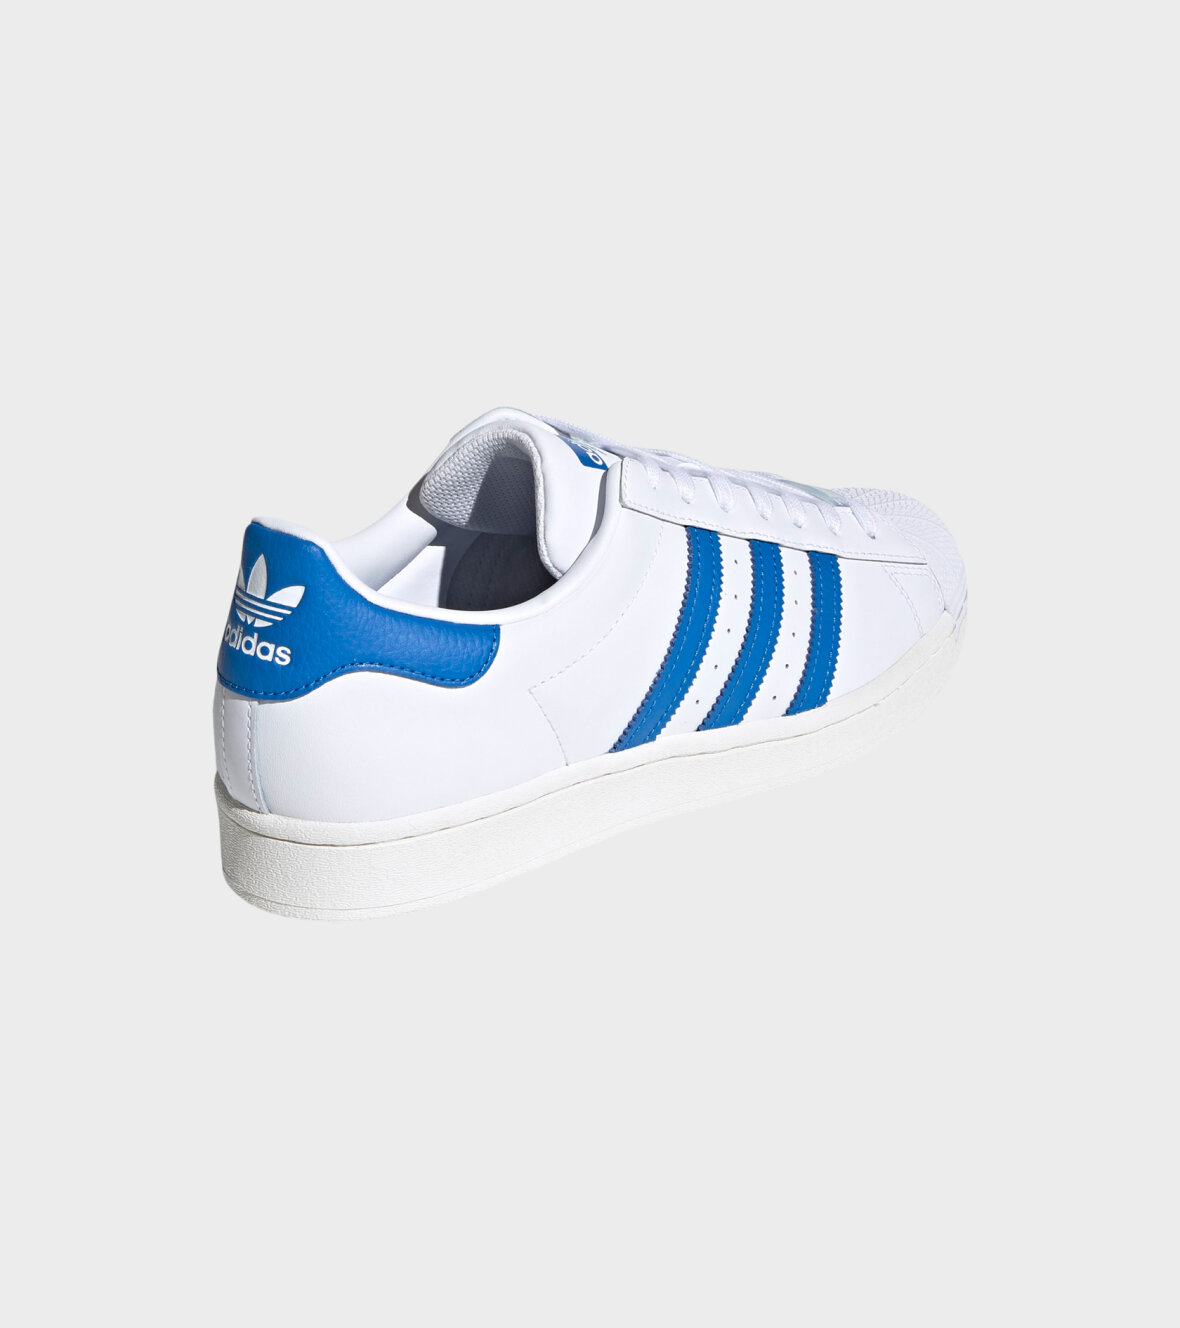 dr. - Shoes - Adidas -